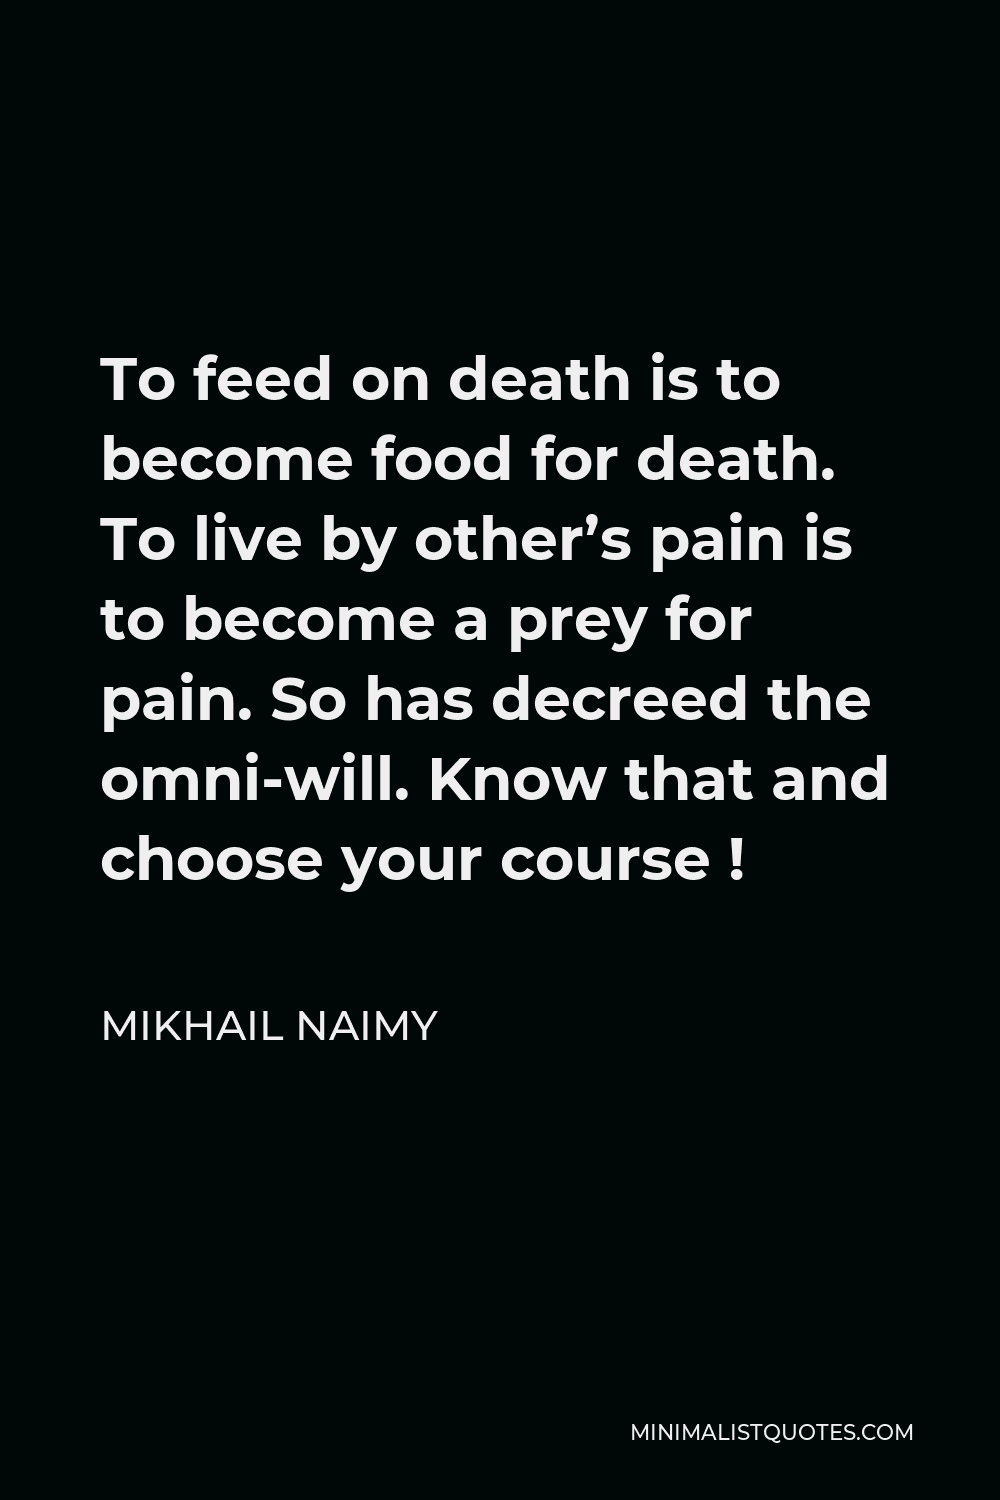 Mikhail Naimy Quote - To feed on death is to become food for death. To live by other’s pain is to become a prey for pain. So has decreed the omni-will. Know that and choose your course !